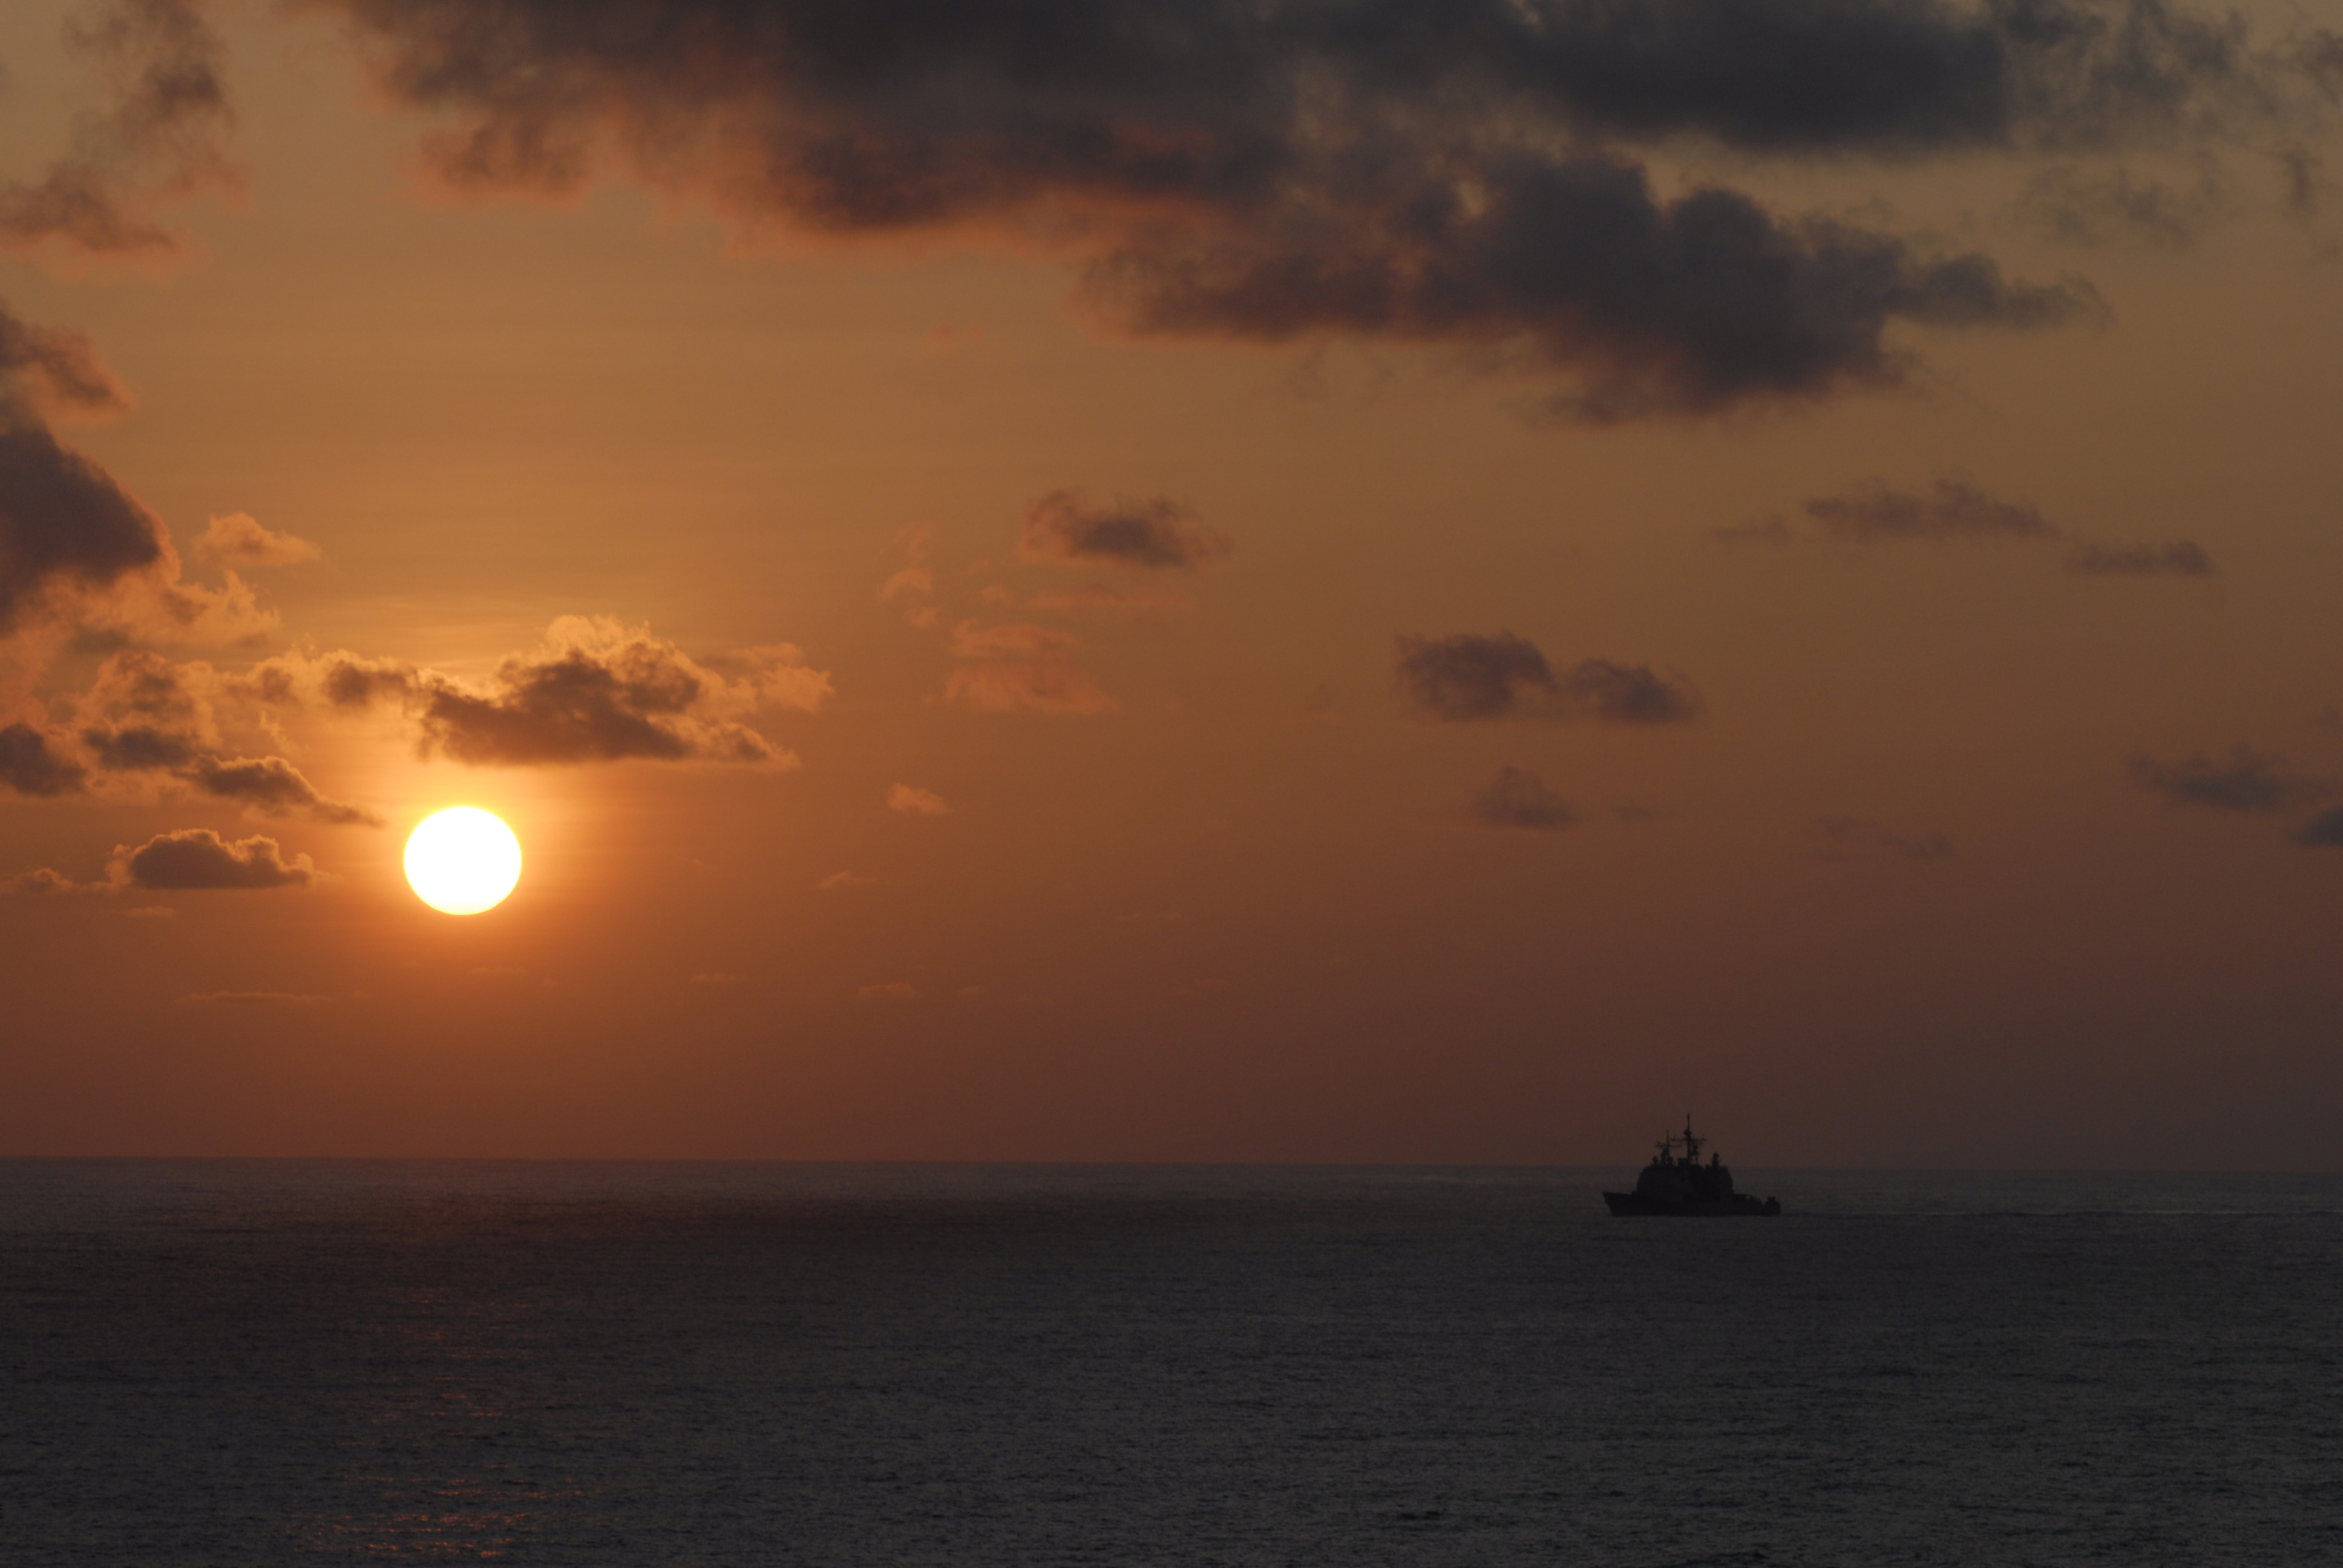 US Navy 090324-N-8157C-097 The Ticonderoga-class guided-missile cruiser USS Antietam (CG 54) transits through the ocean at sunset